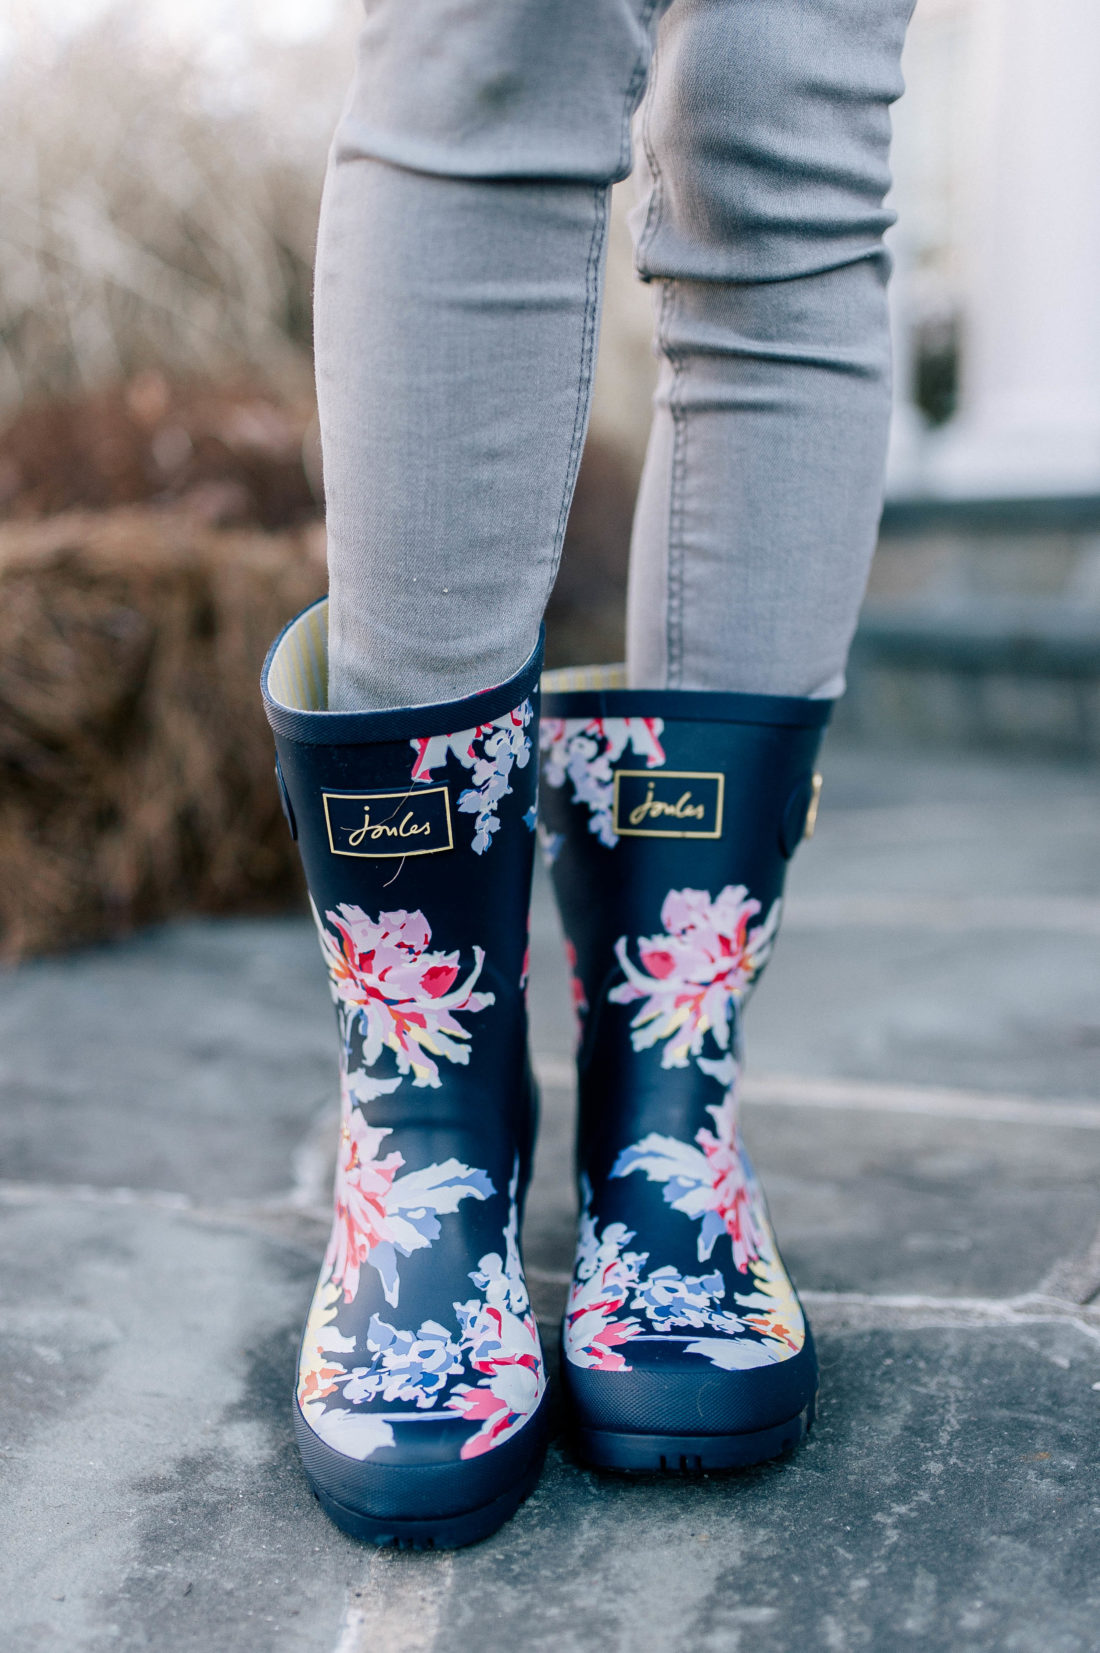 Eva Amurri Martino wears a set of navy flower patterned rain boots by Joules